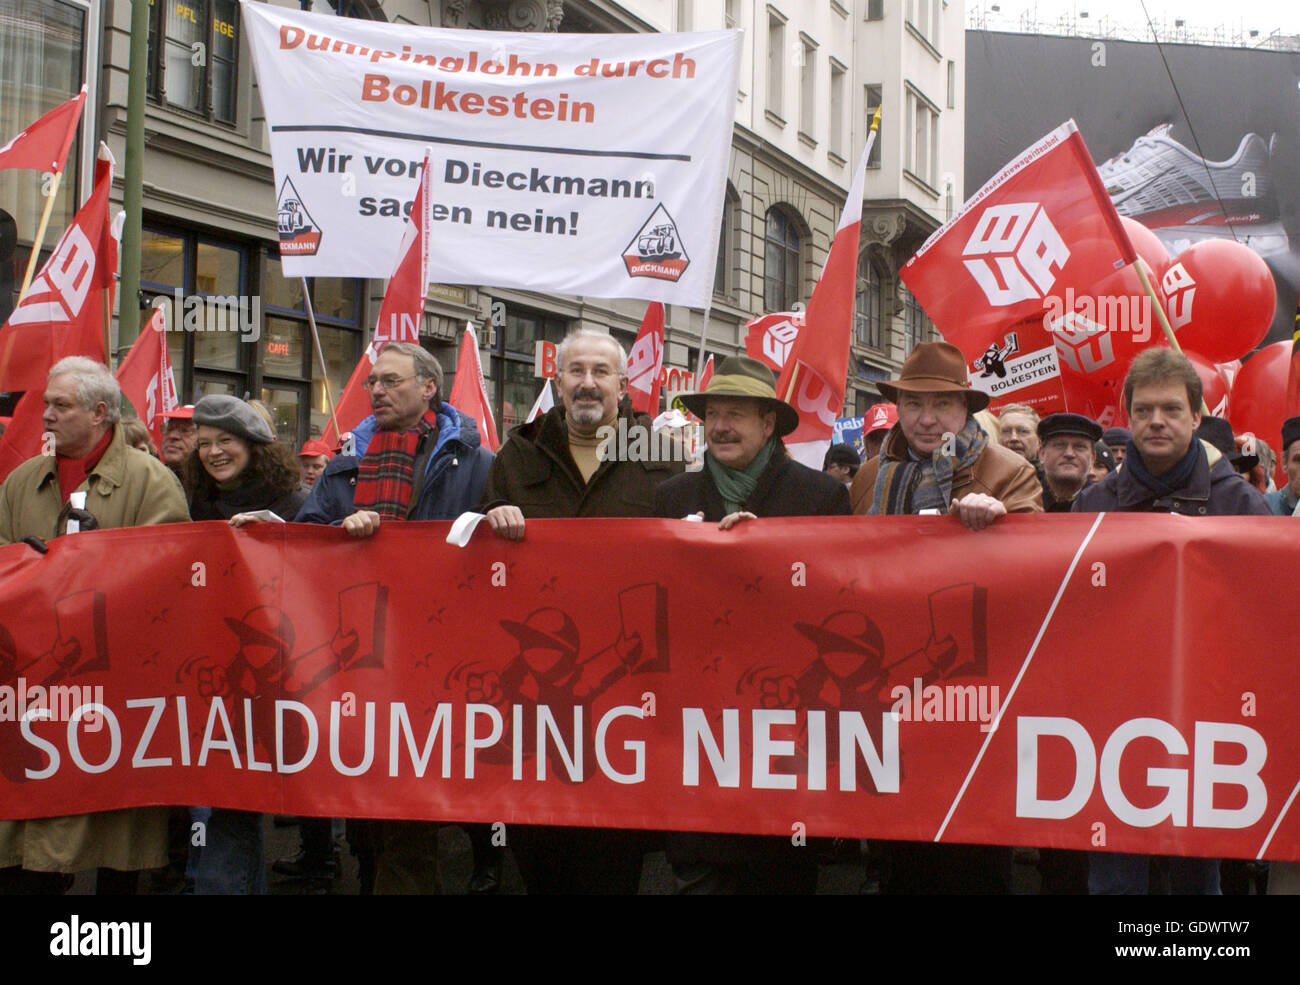 "DGB demonstration ""Europe YES, Social Dumping NO""" Stock Photo